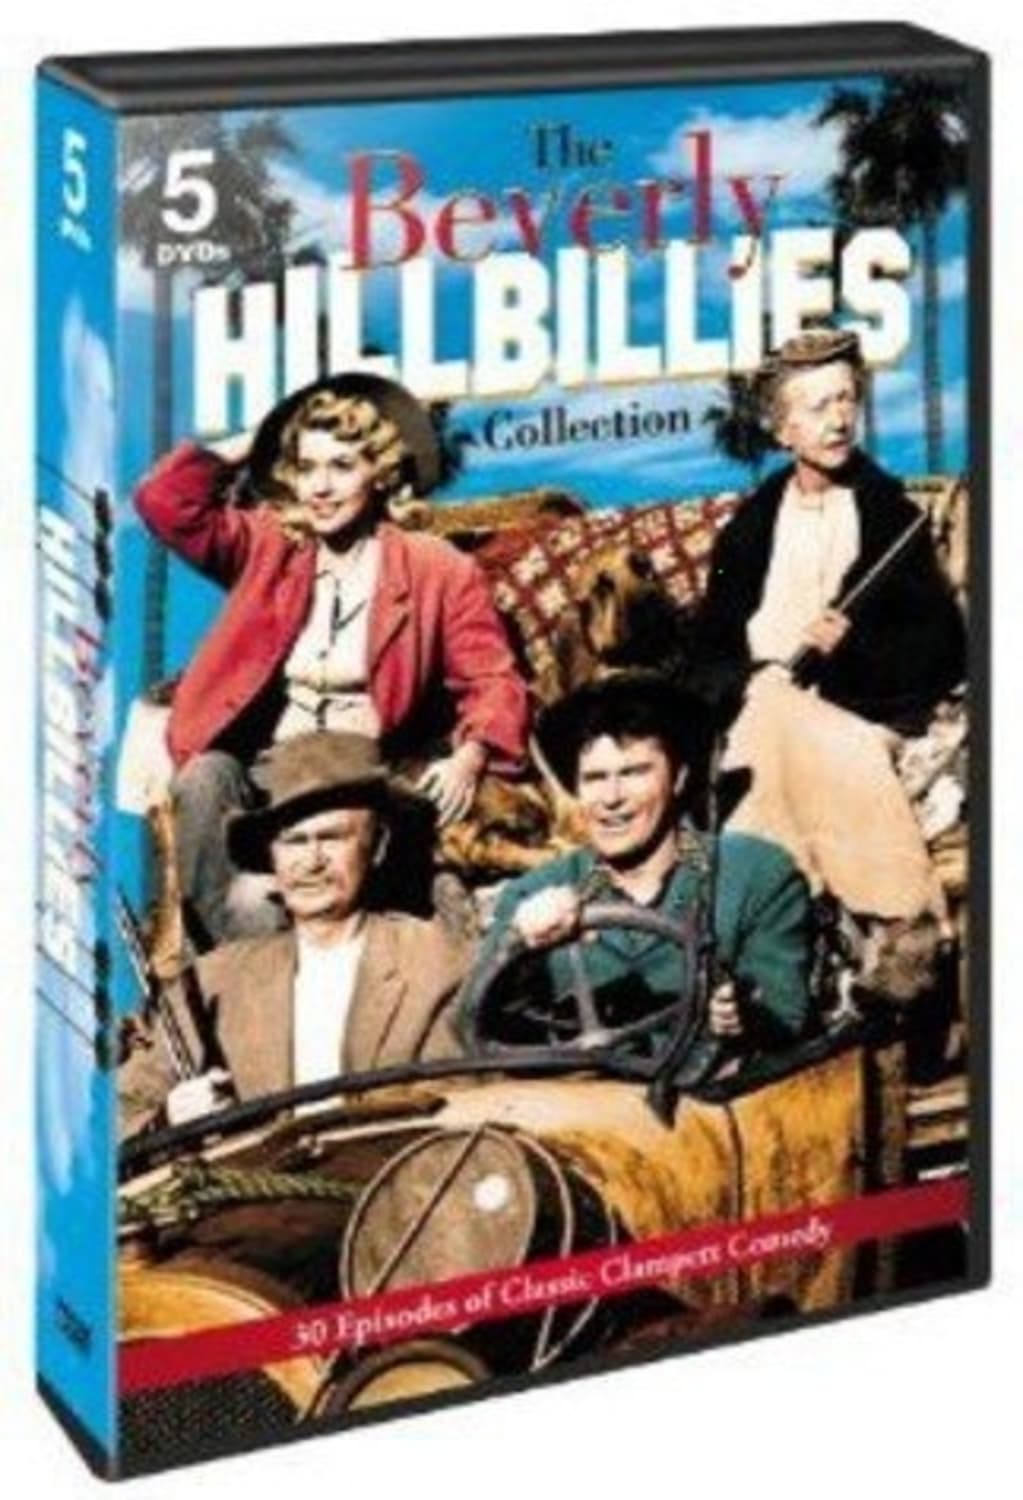 The Beverly Hillbillies Collection (DVD) on MovieShack